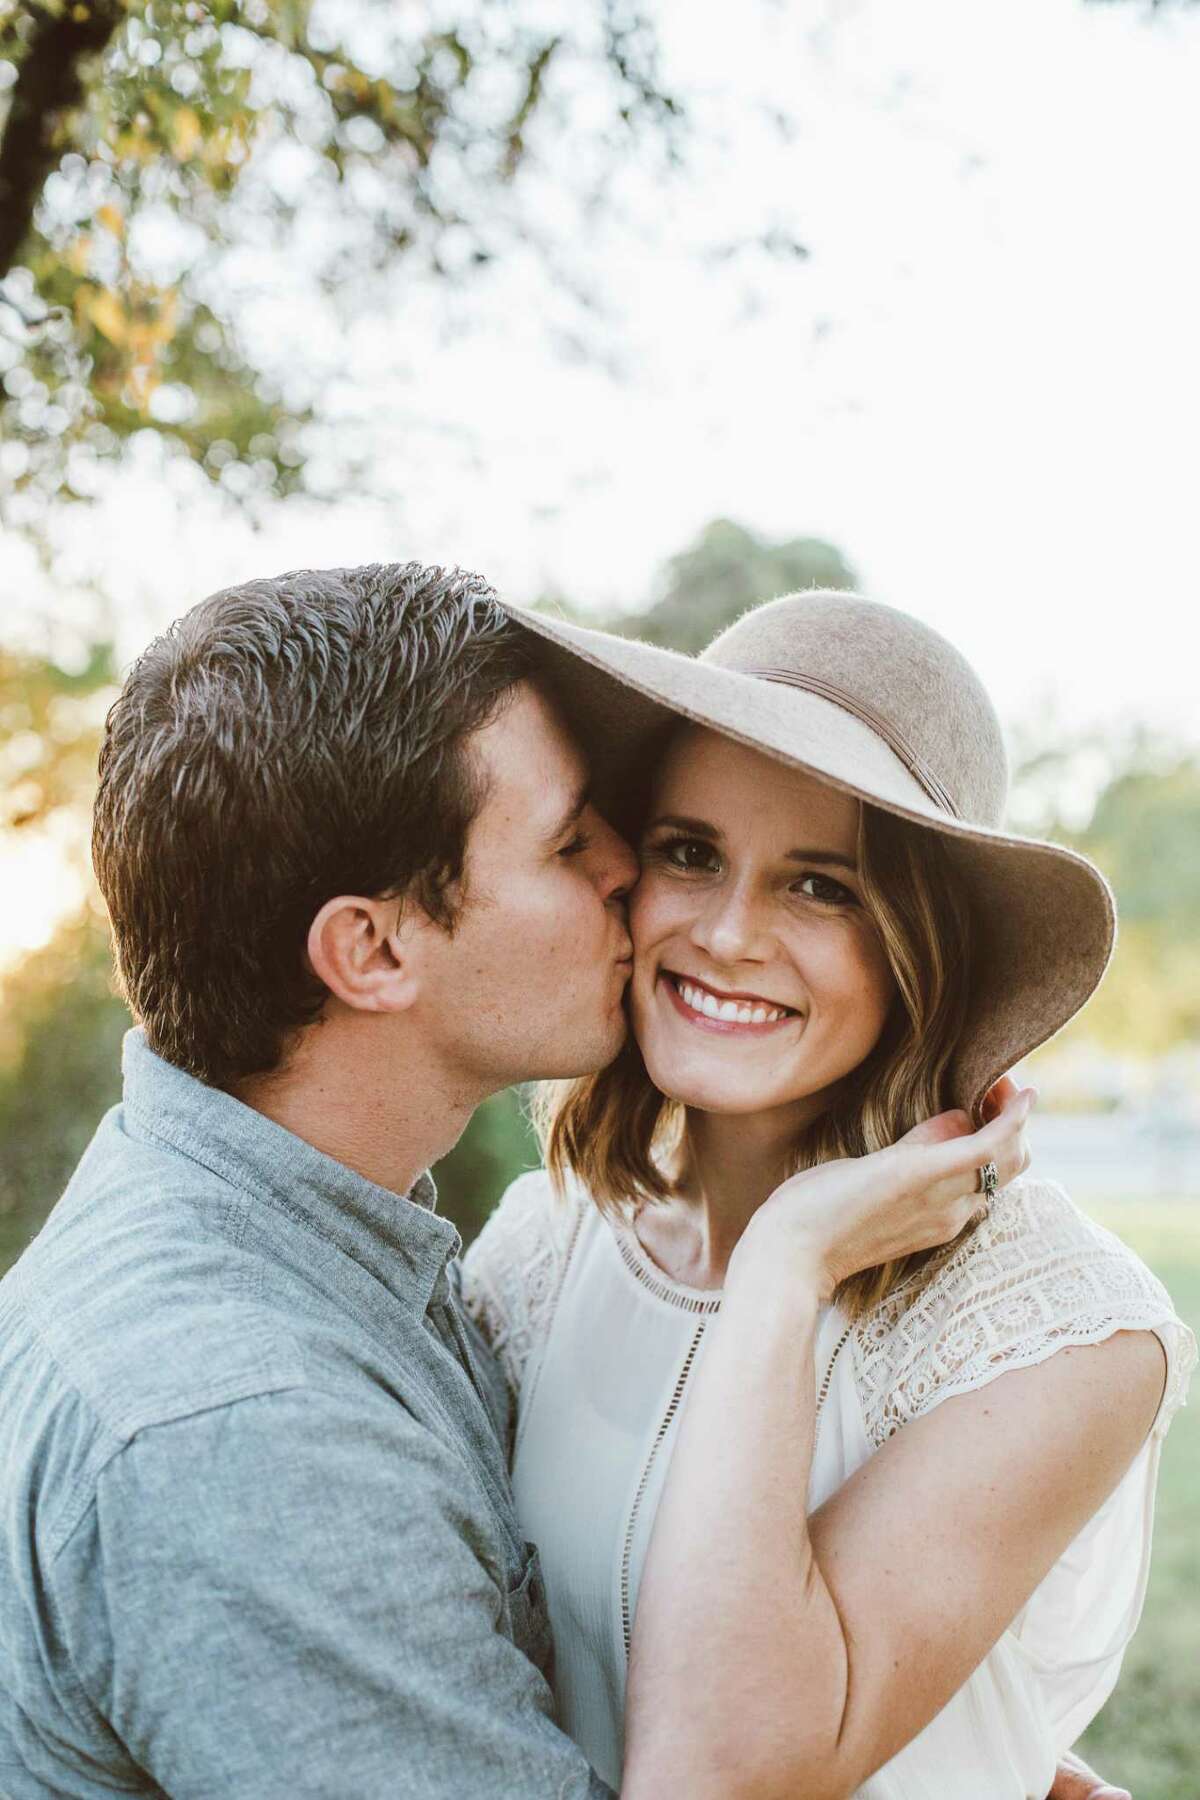 Ryan Folsom, 29, a fourth-year student at UT Health San Antonio’s School of Medicine, died Jan. 7 when a wrong-way driver crashed into his car on a California interstate. His wife, Lauren, gave birth to their third son Monday.